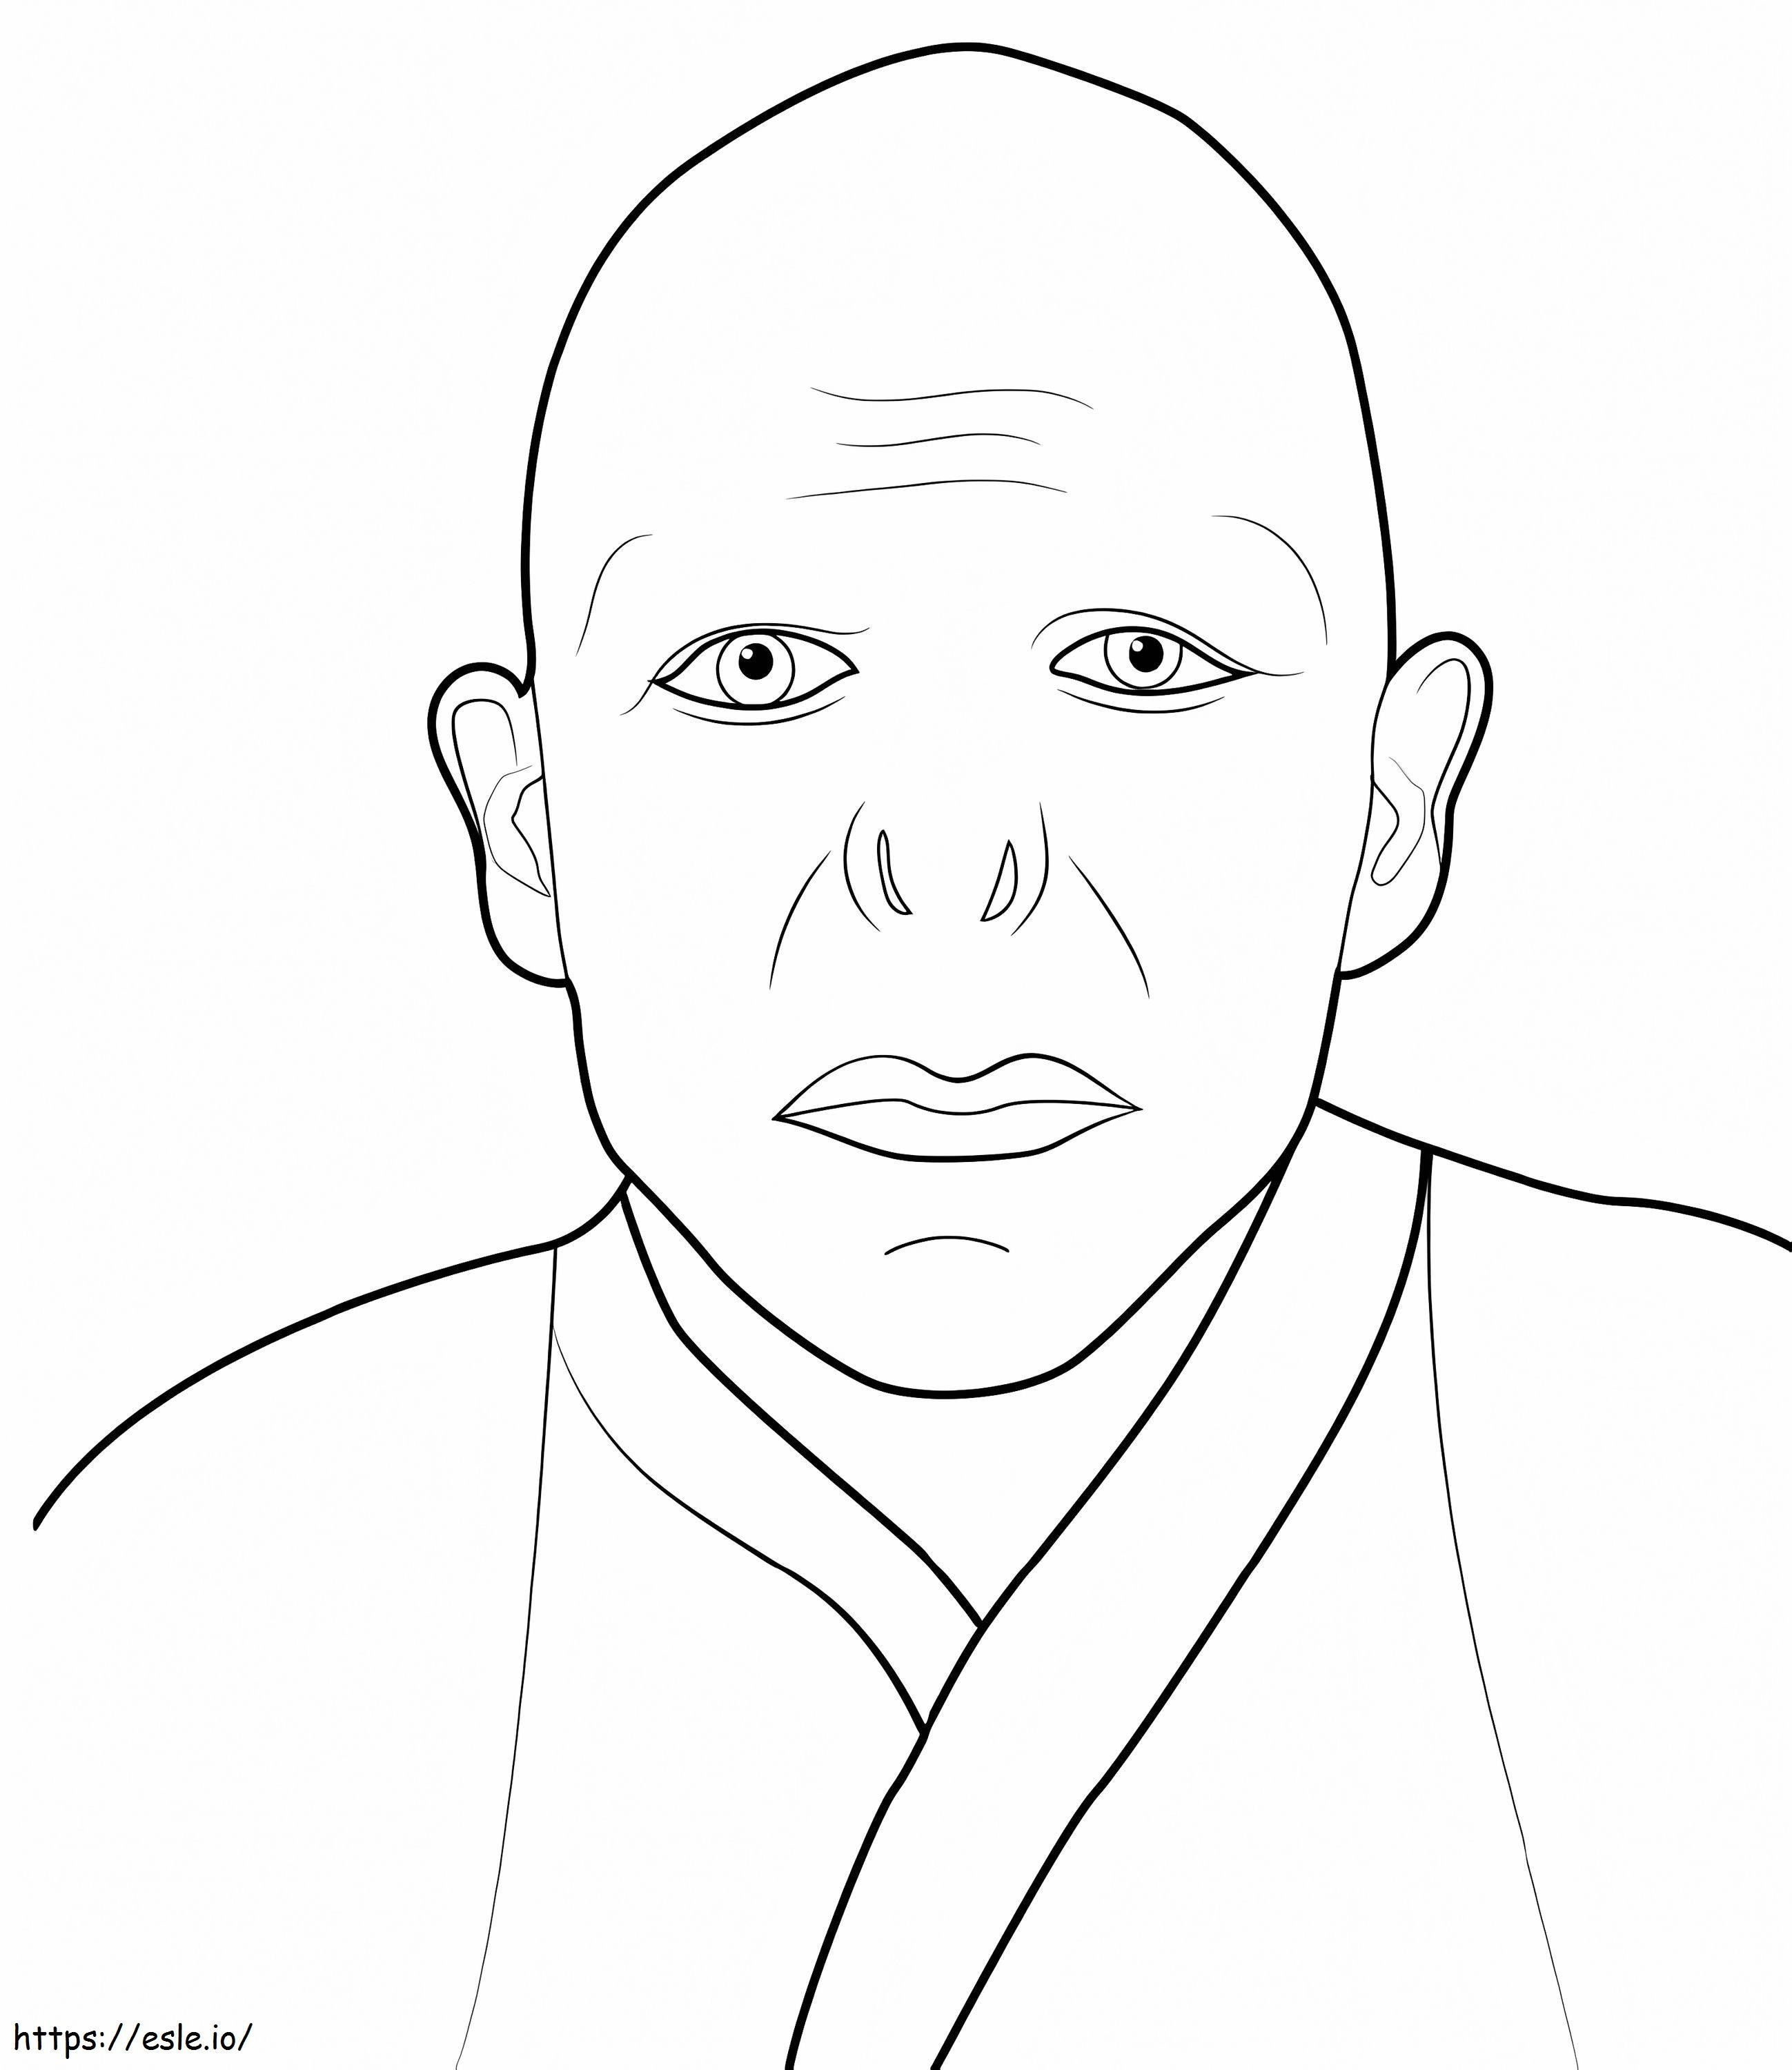 Lord Voldemort coloring page